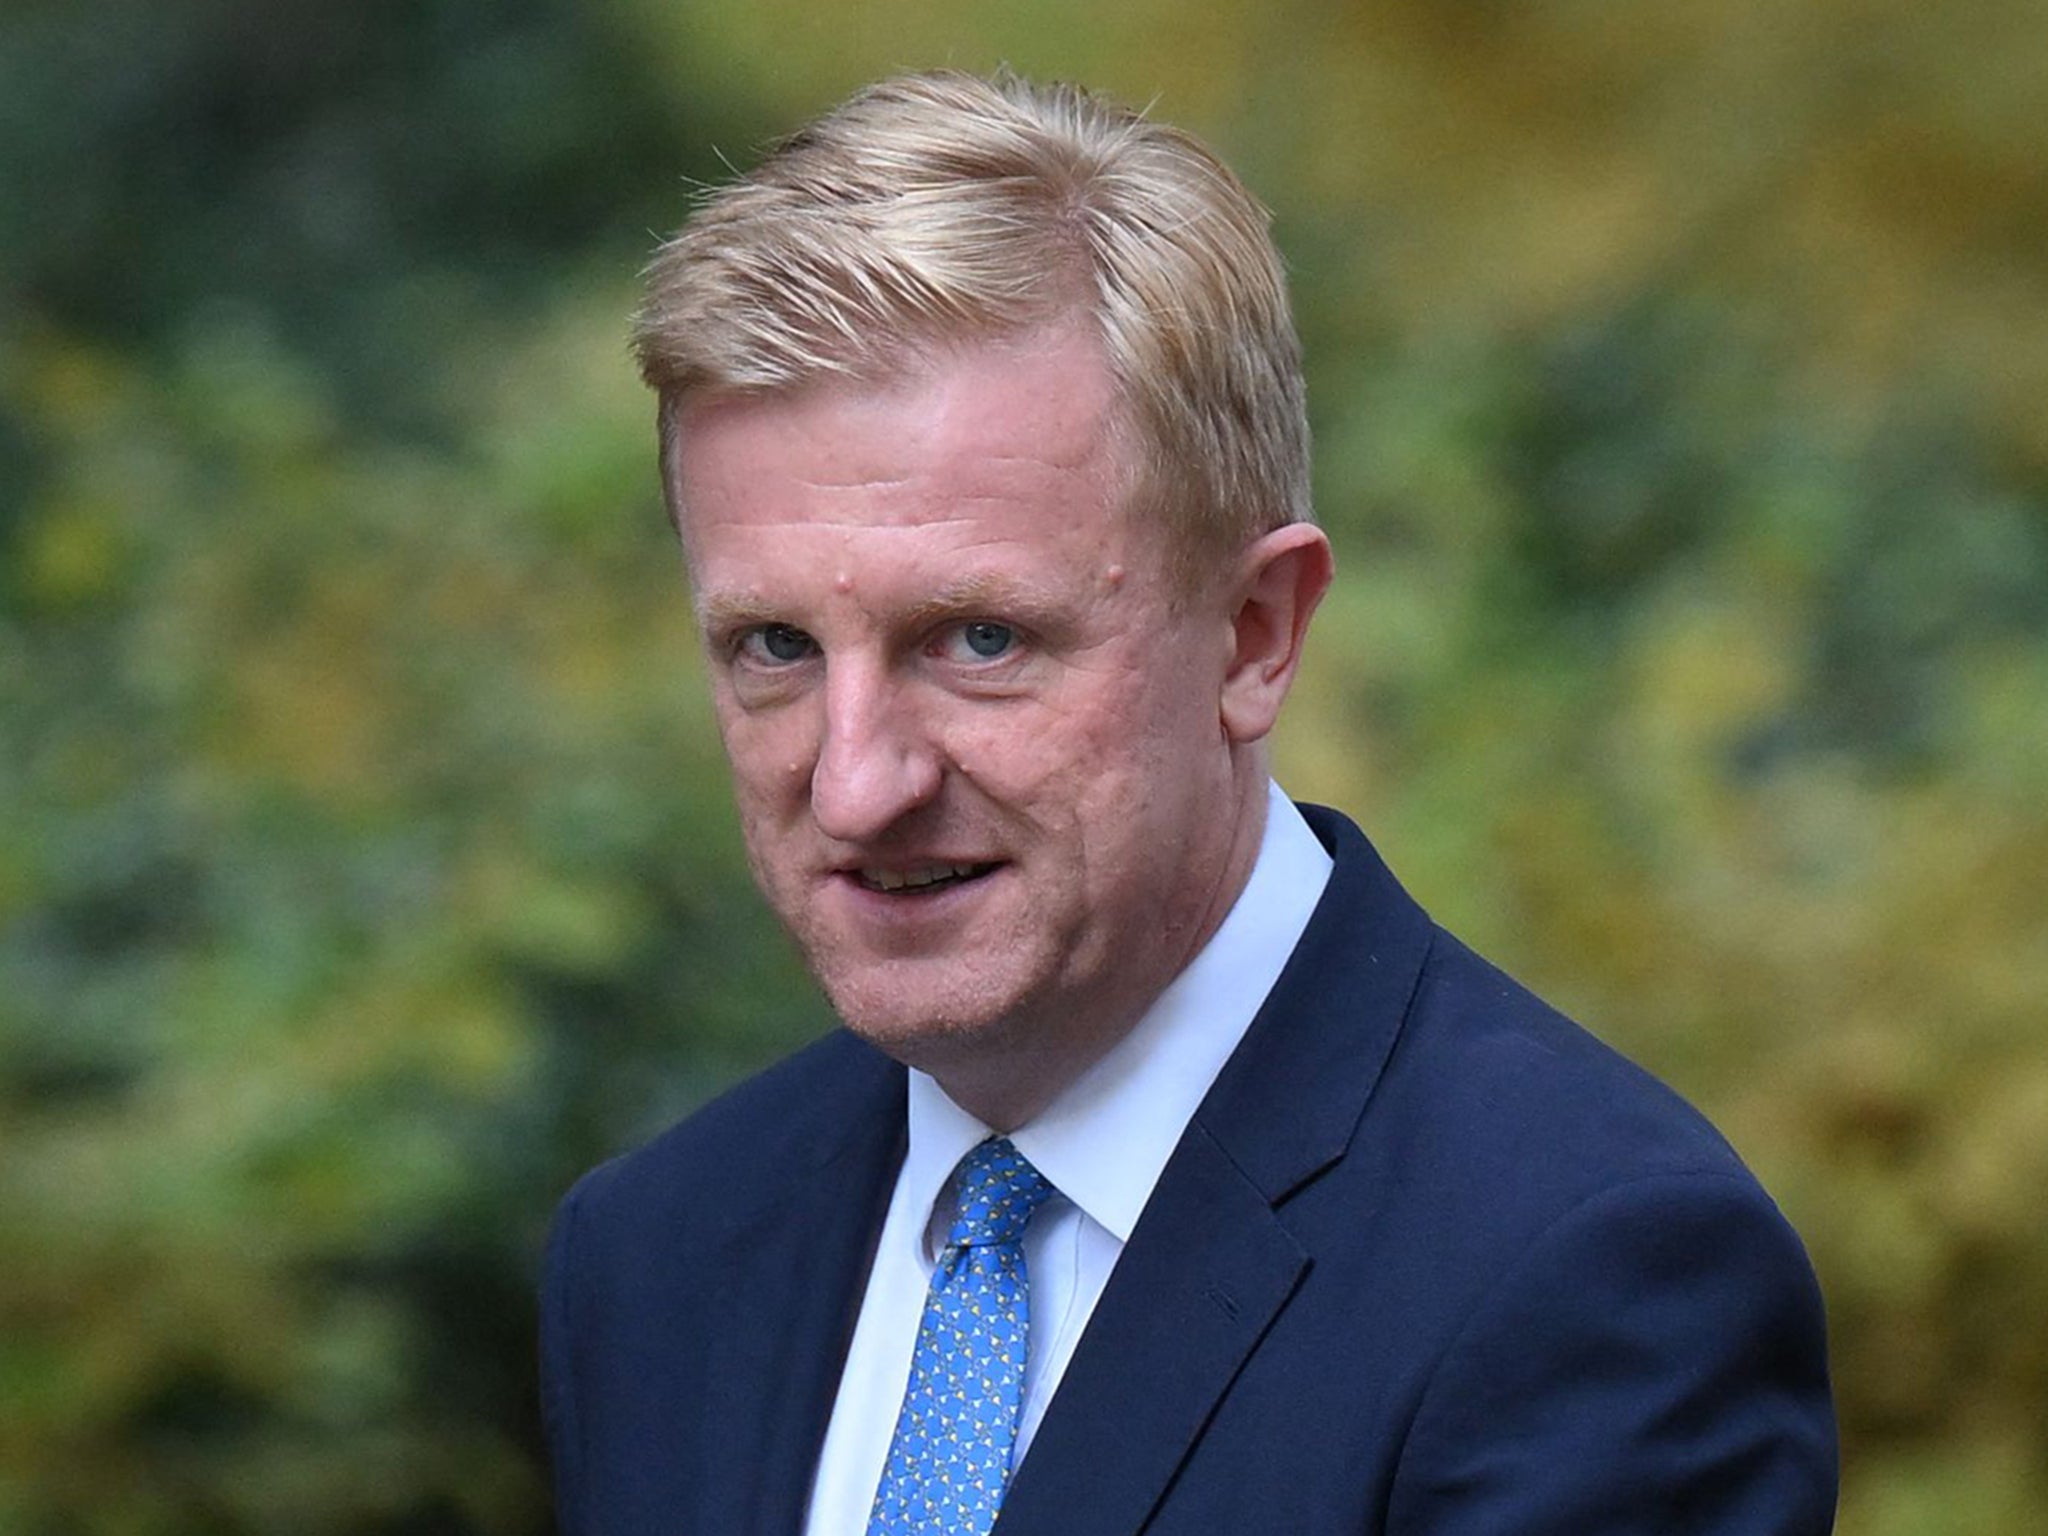 Dowden previously served as the chairman of the Conservative Party, but resigned last year after the Tories’ dire losses in two by-elections